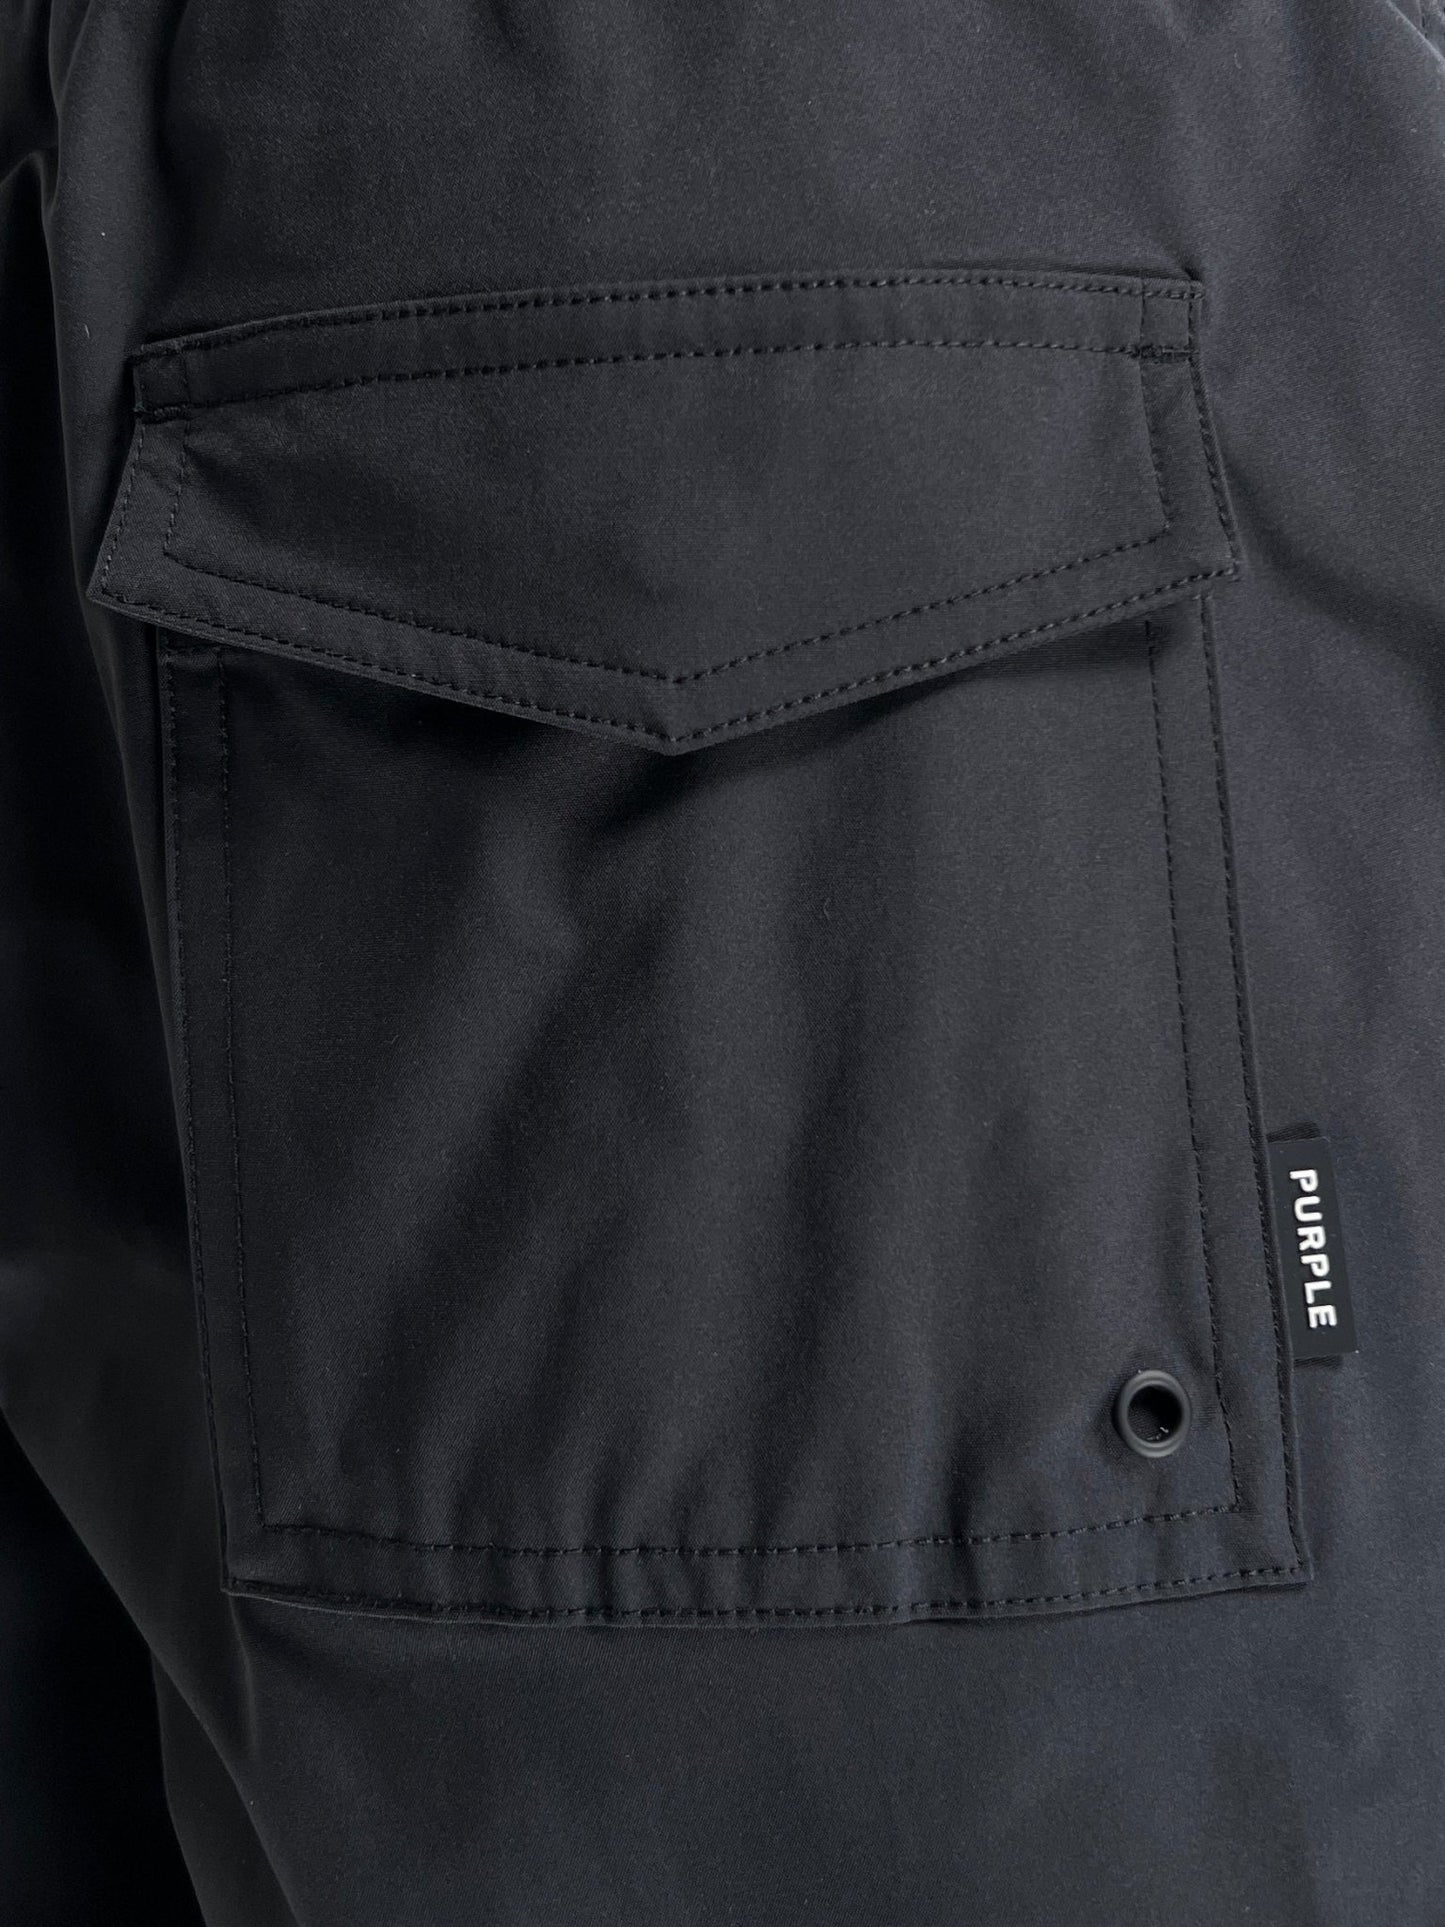 Close-up of a black Polyester swim trunks pocket with a button snap and a brand tag reading "PURPLE BRAND P504-PBUC ALL ROUND SHORT BLACK.